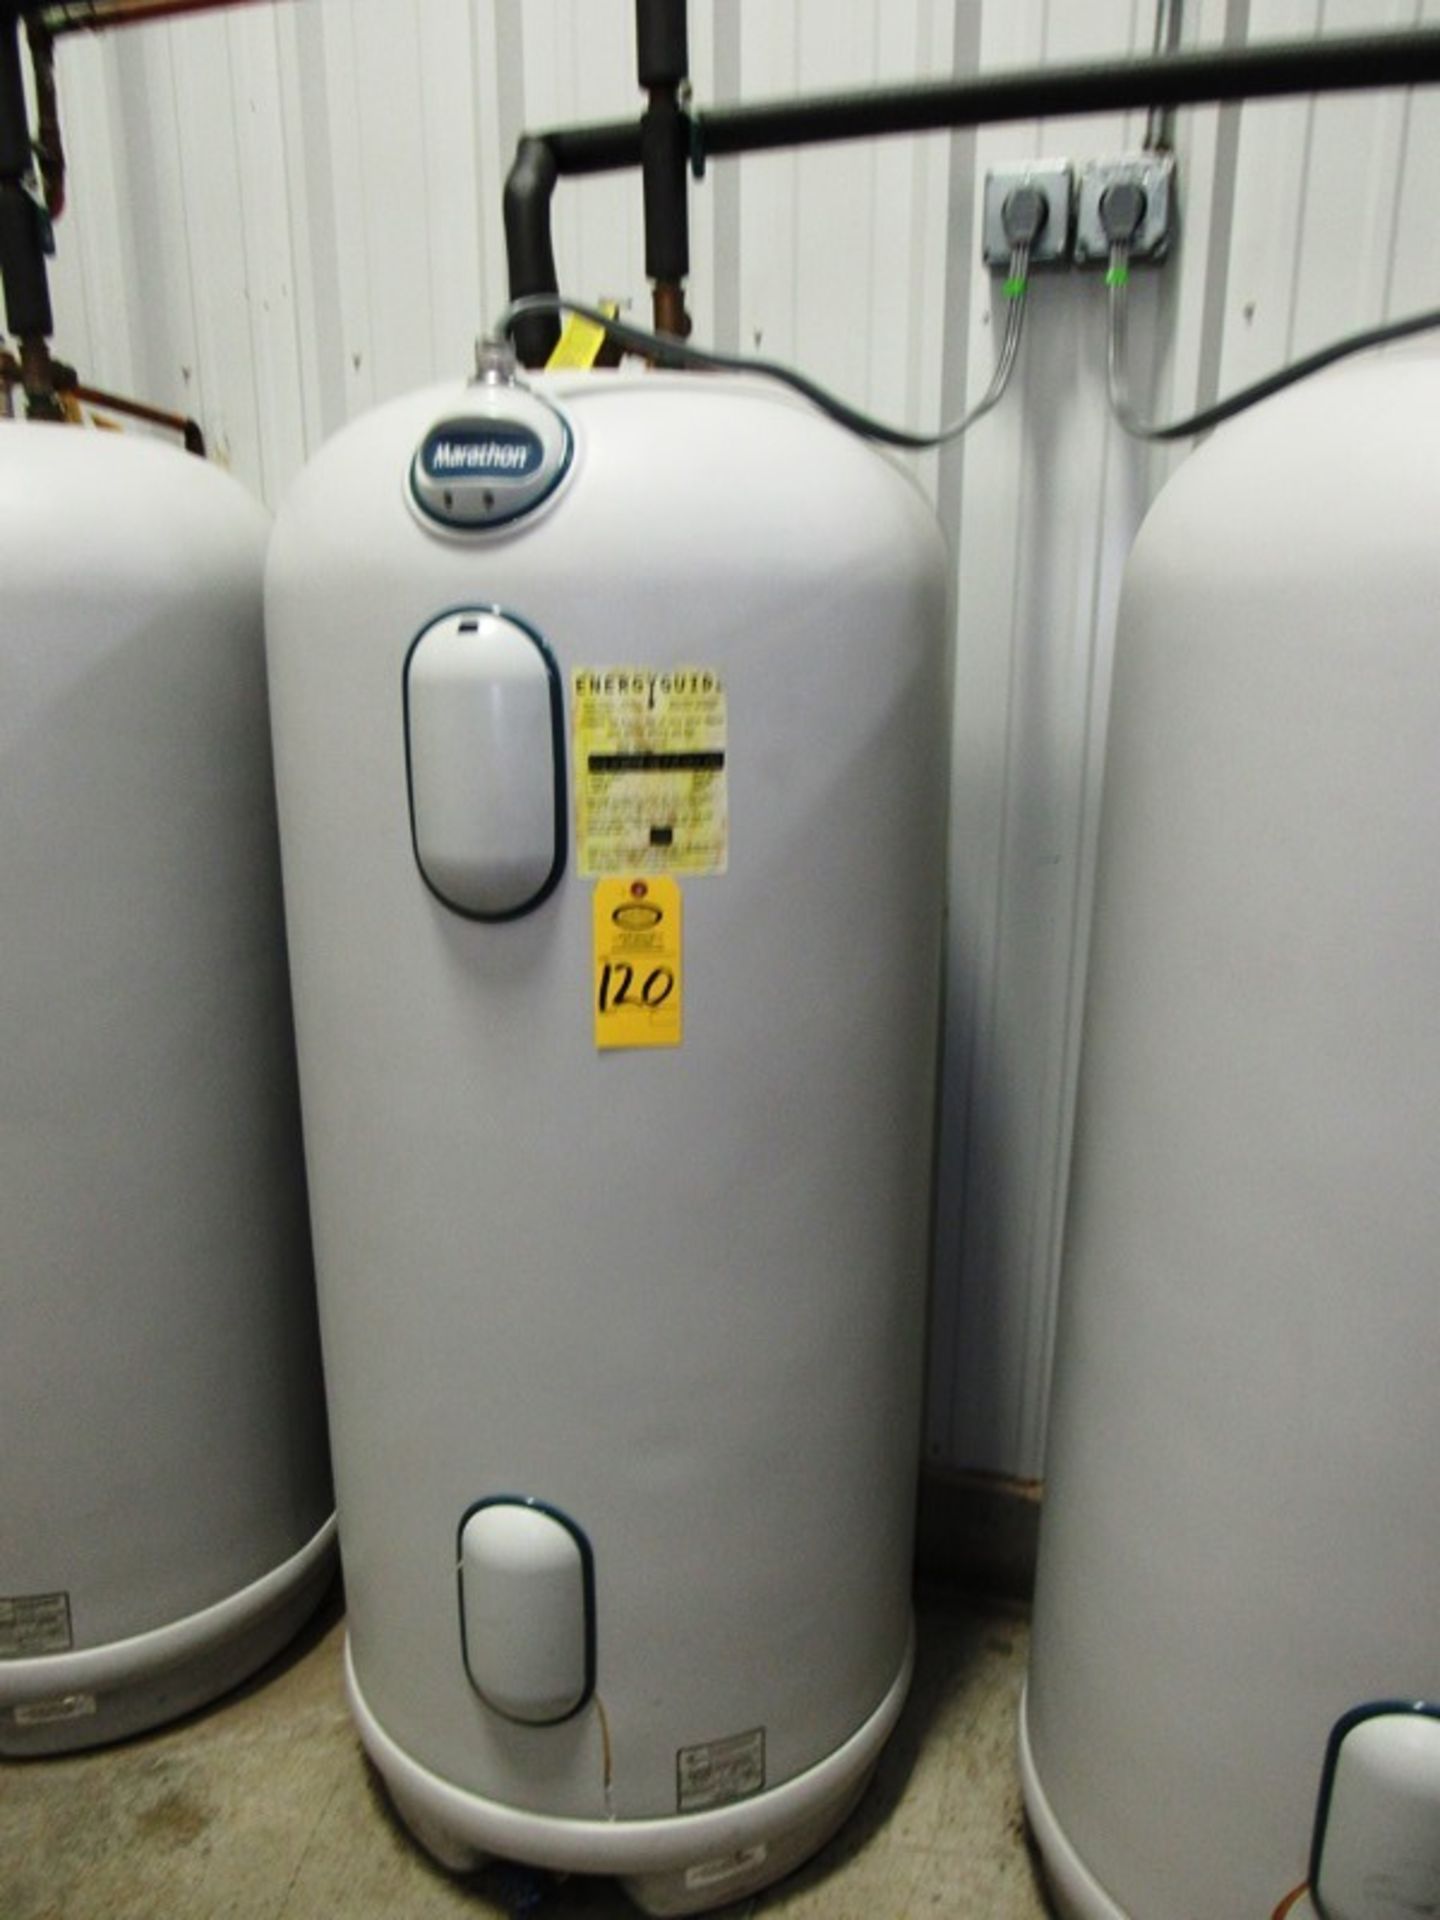 Marathon Mdl. MR105245B Electric Water Heater, 105 gallon capacity, 240 volts (Removal Begins July